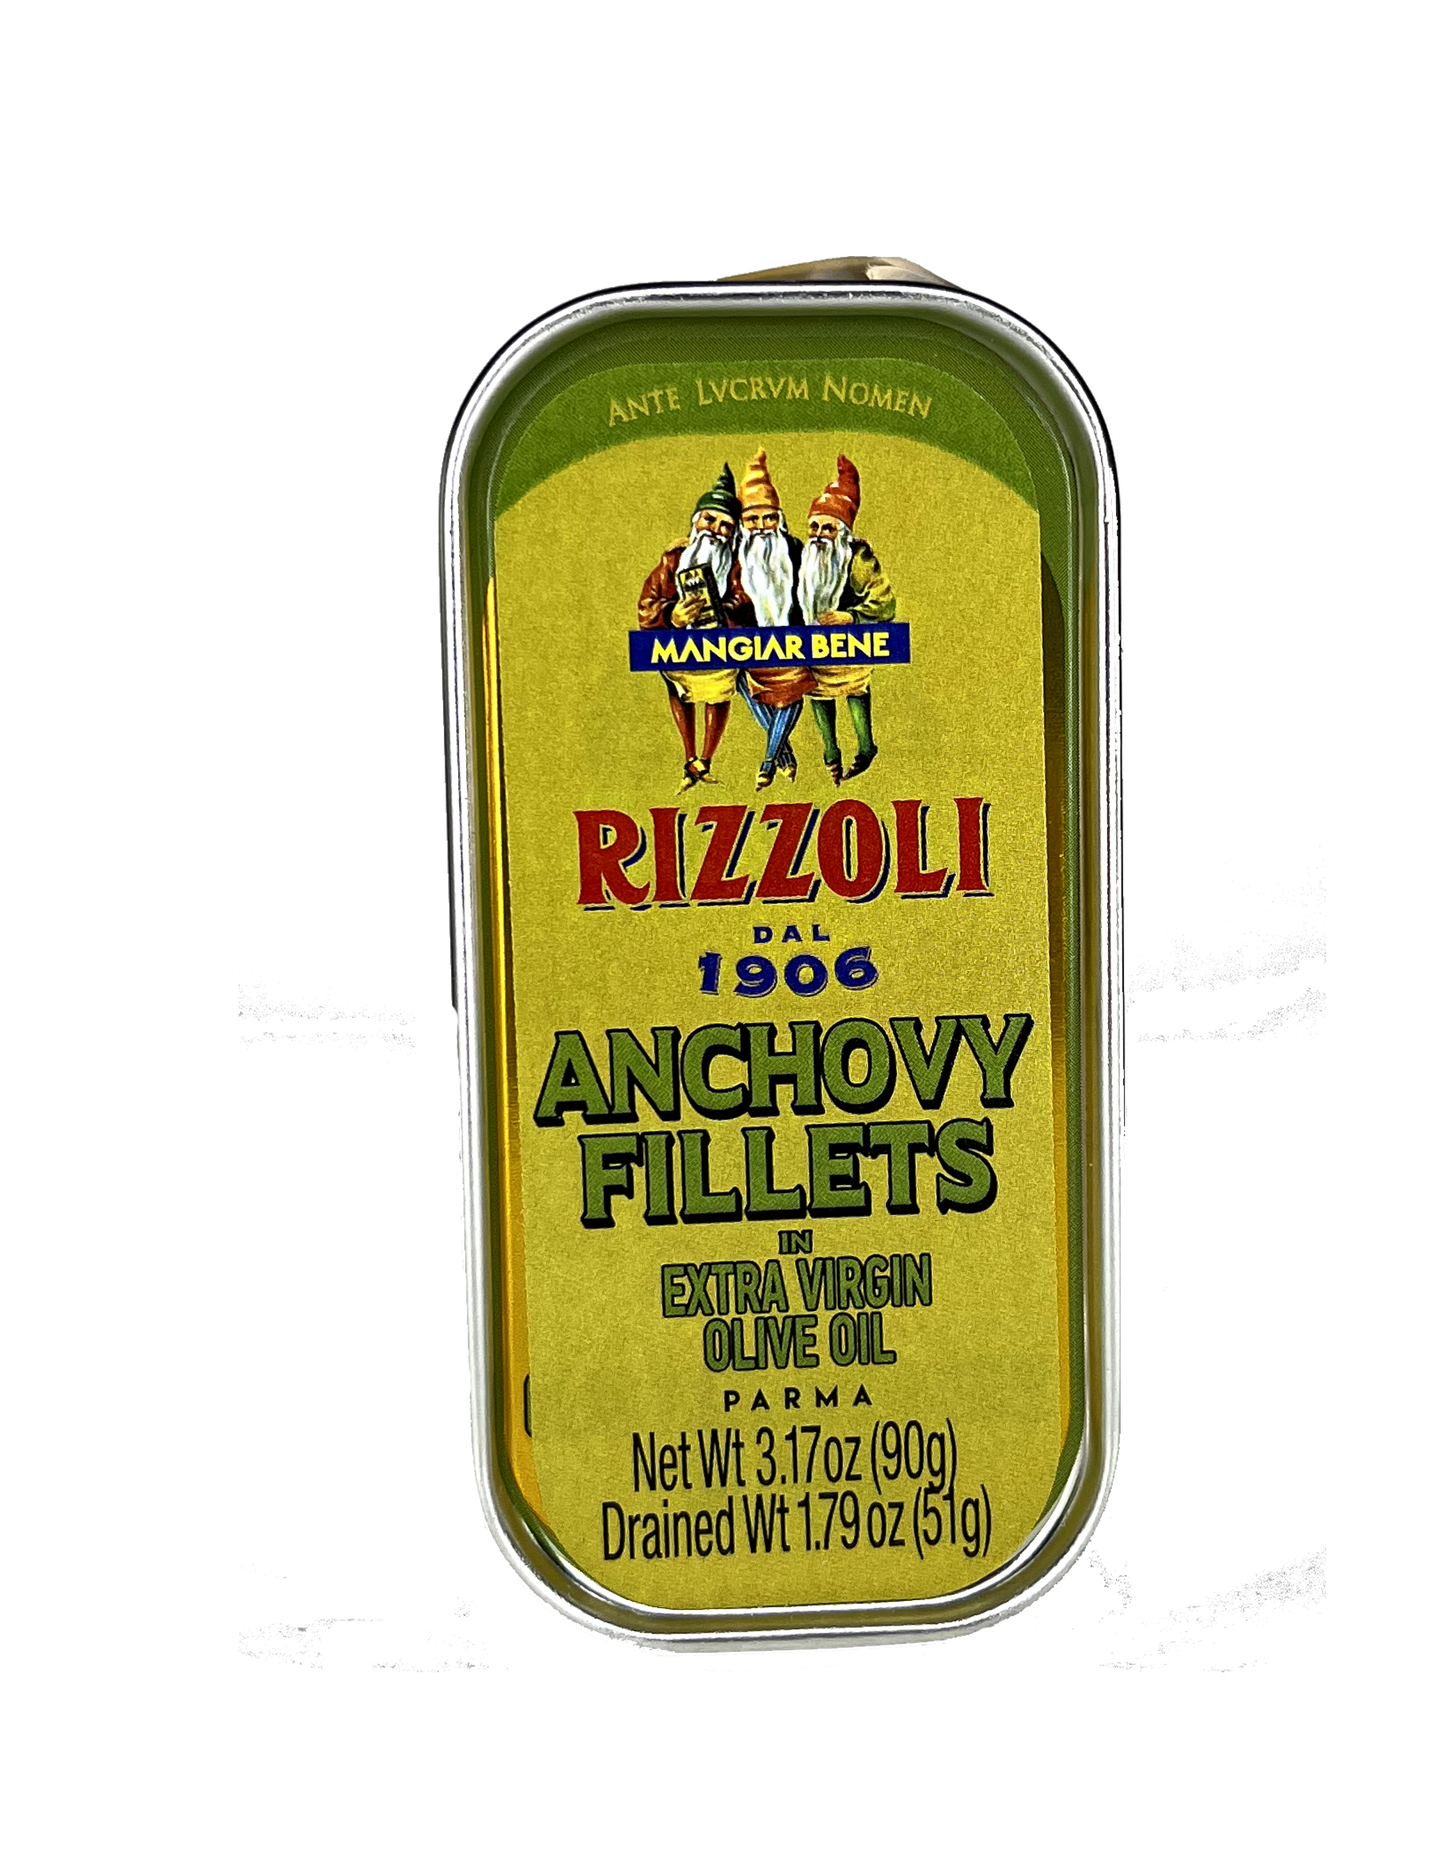 Anchovy fillets Rizzoli